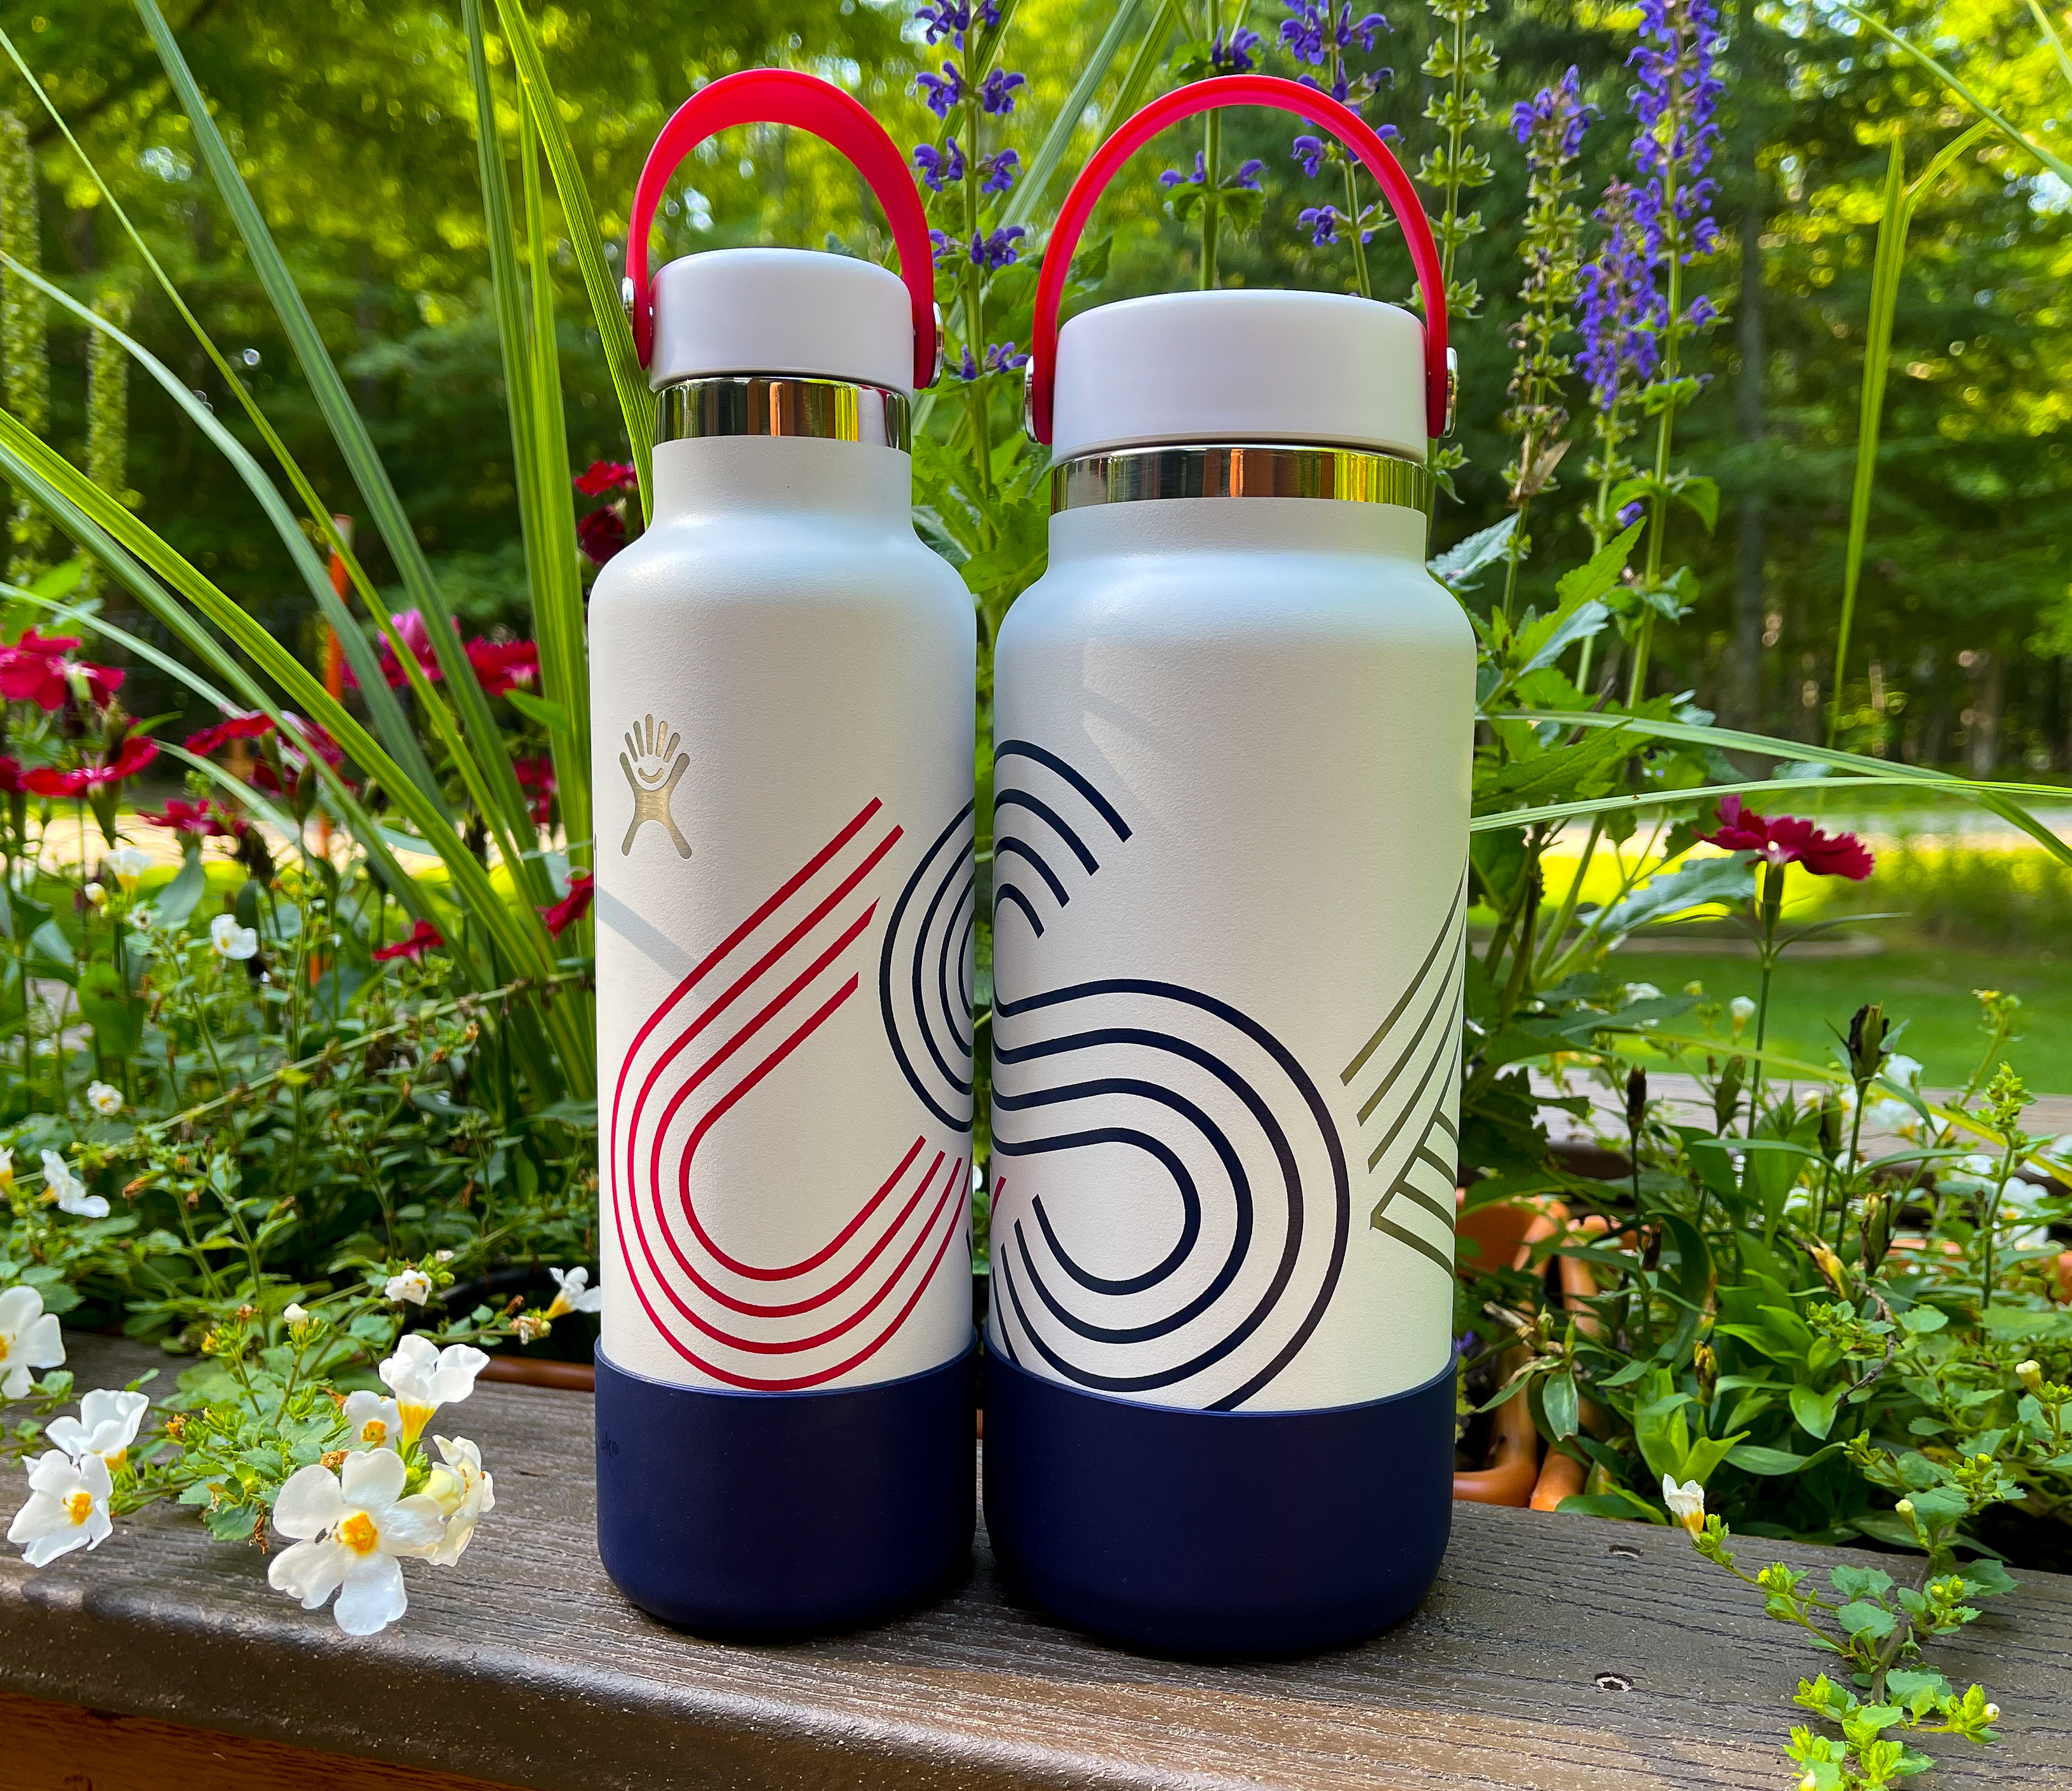 RARE ! Special Limited Edition Hydro Flask with Boot DUNE Aqua 24 oz